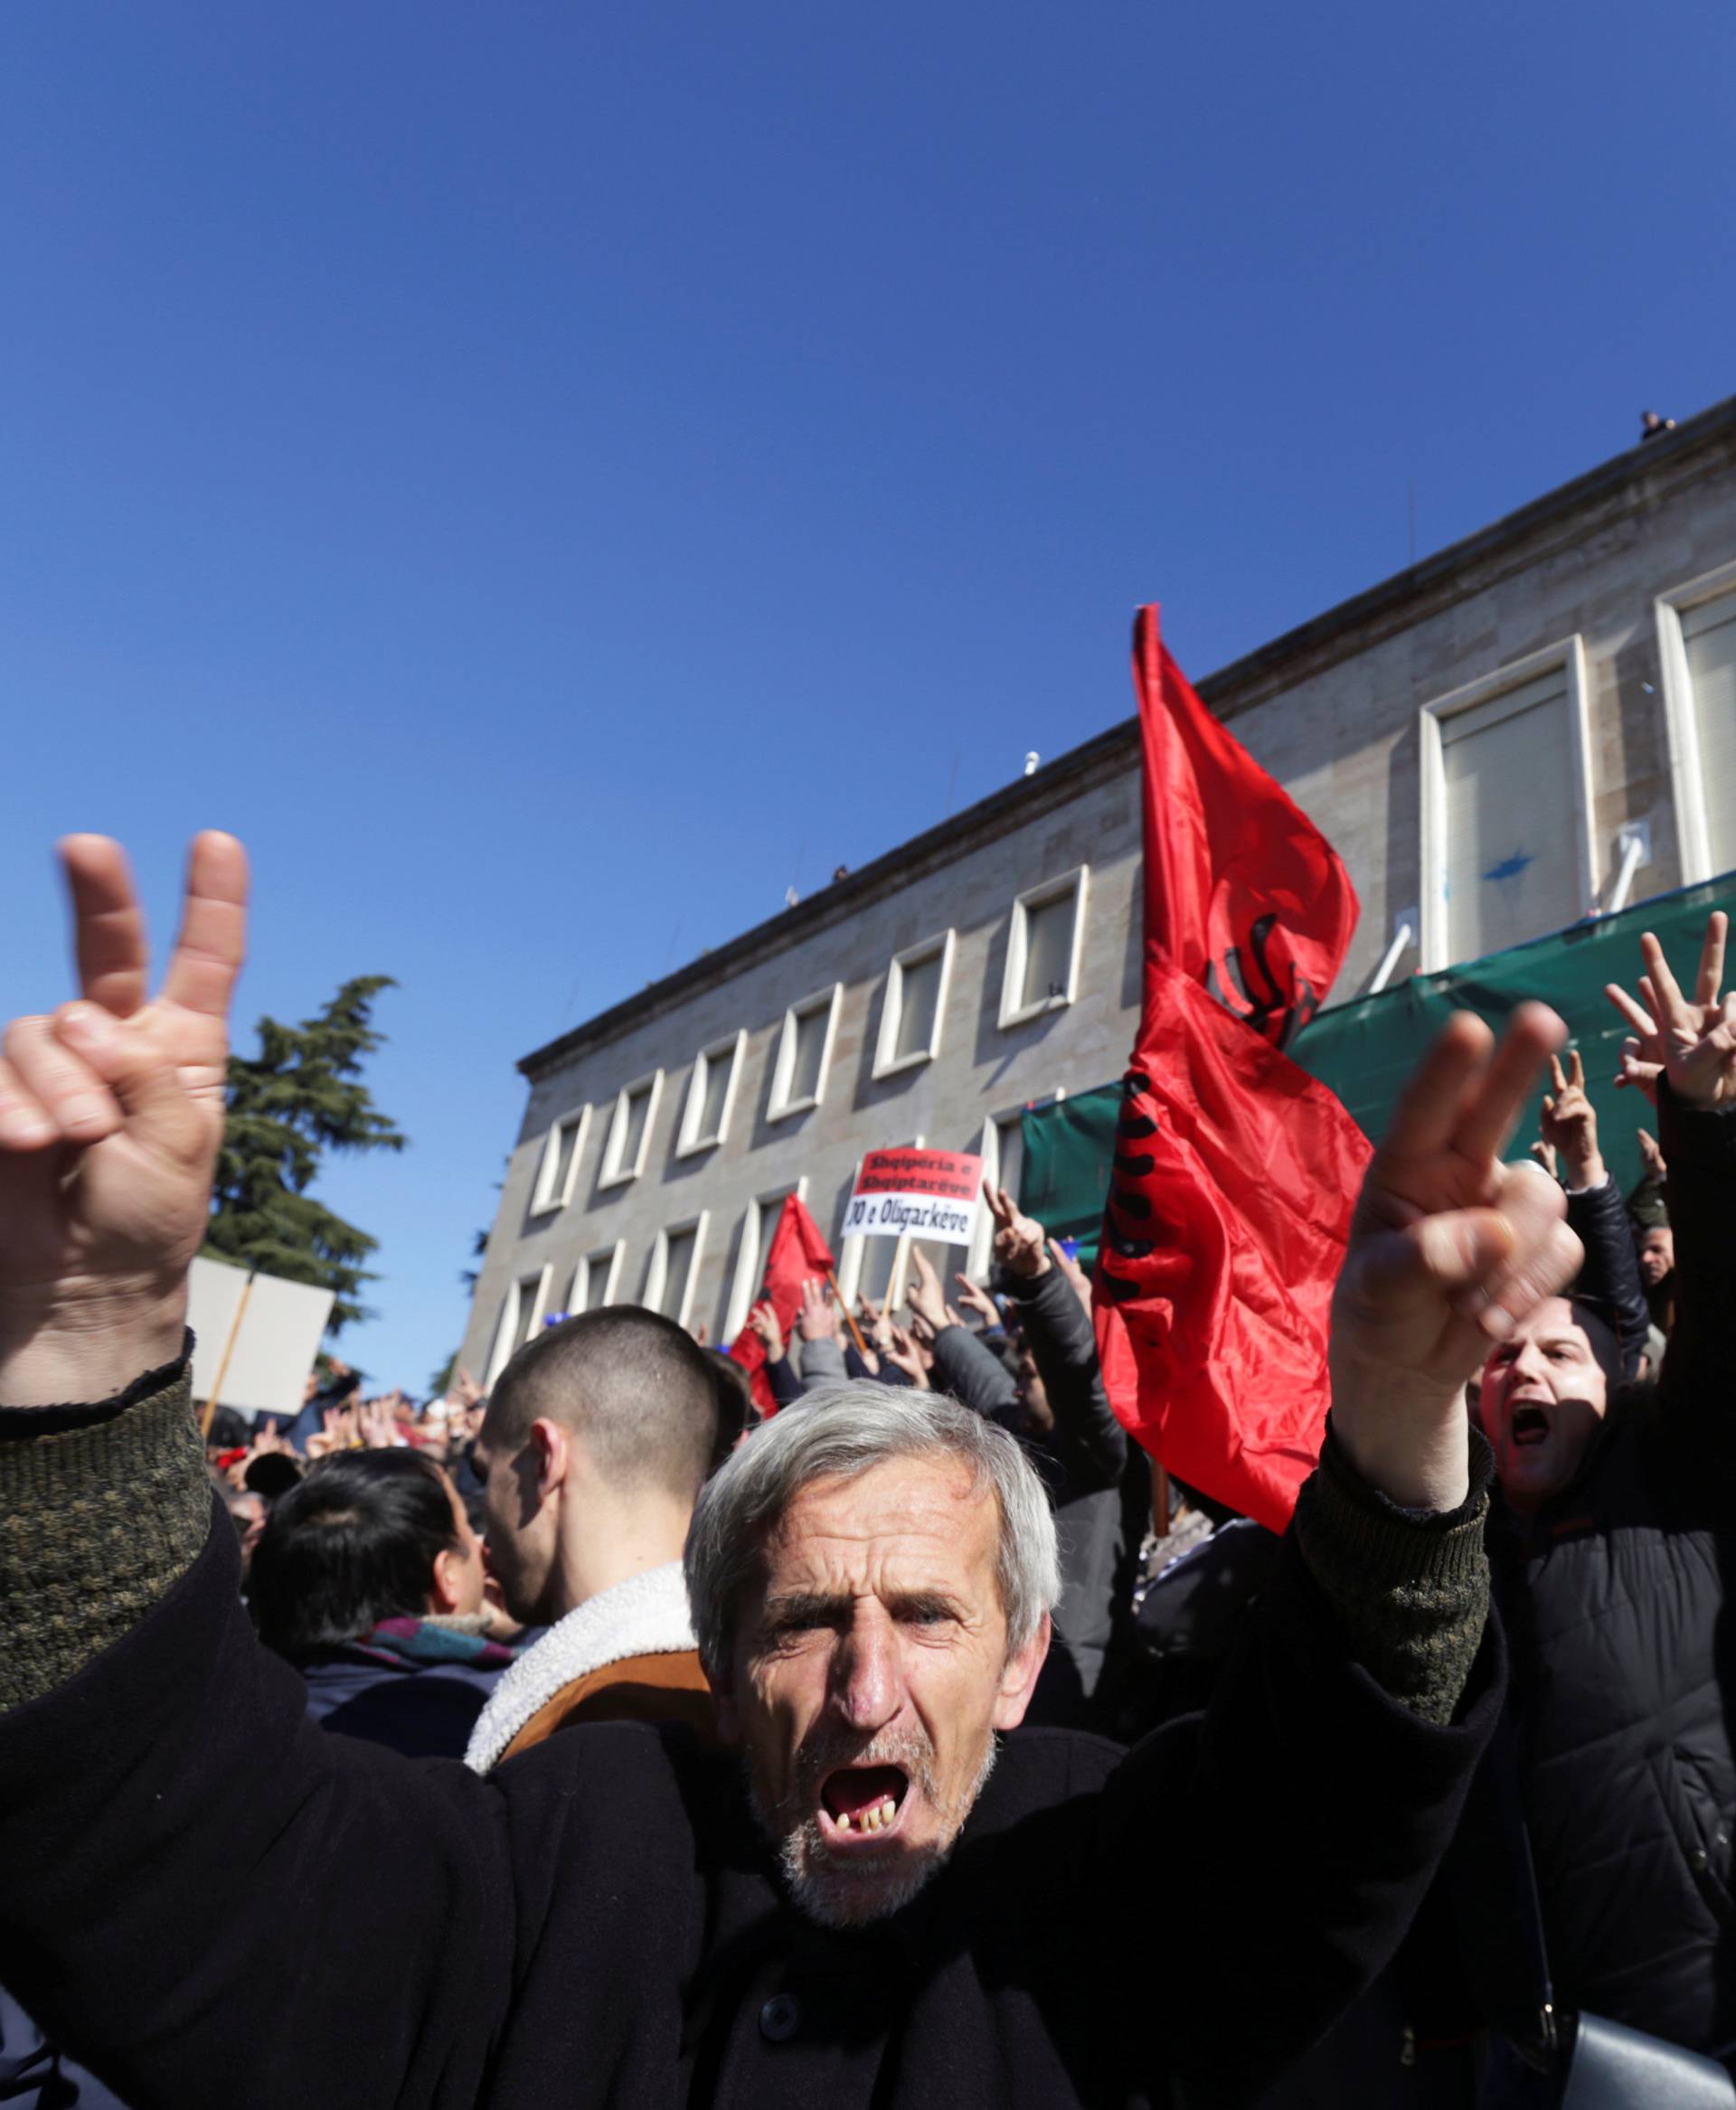 Supporters of the opposition party wave Albanian flags during an anti-government protest in front of the office of Albanian Prime Minister Edi Rama in Tirana